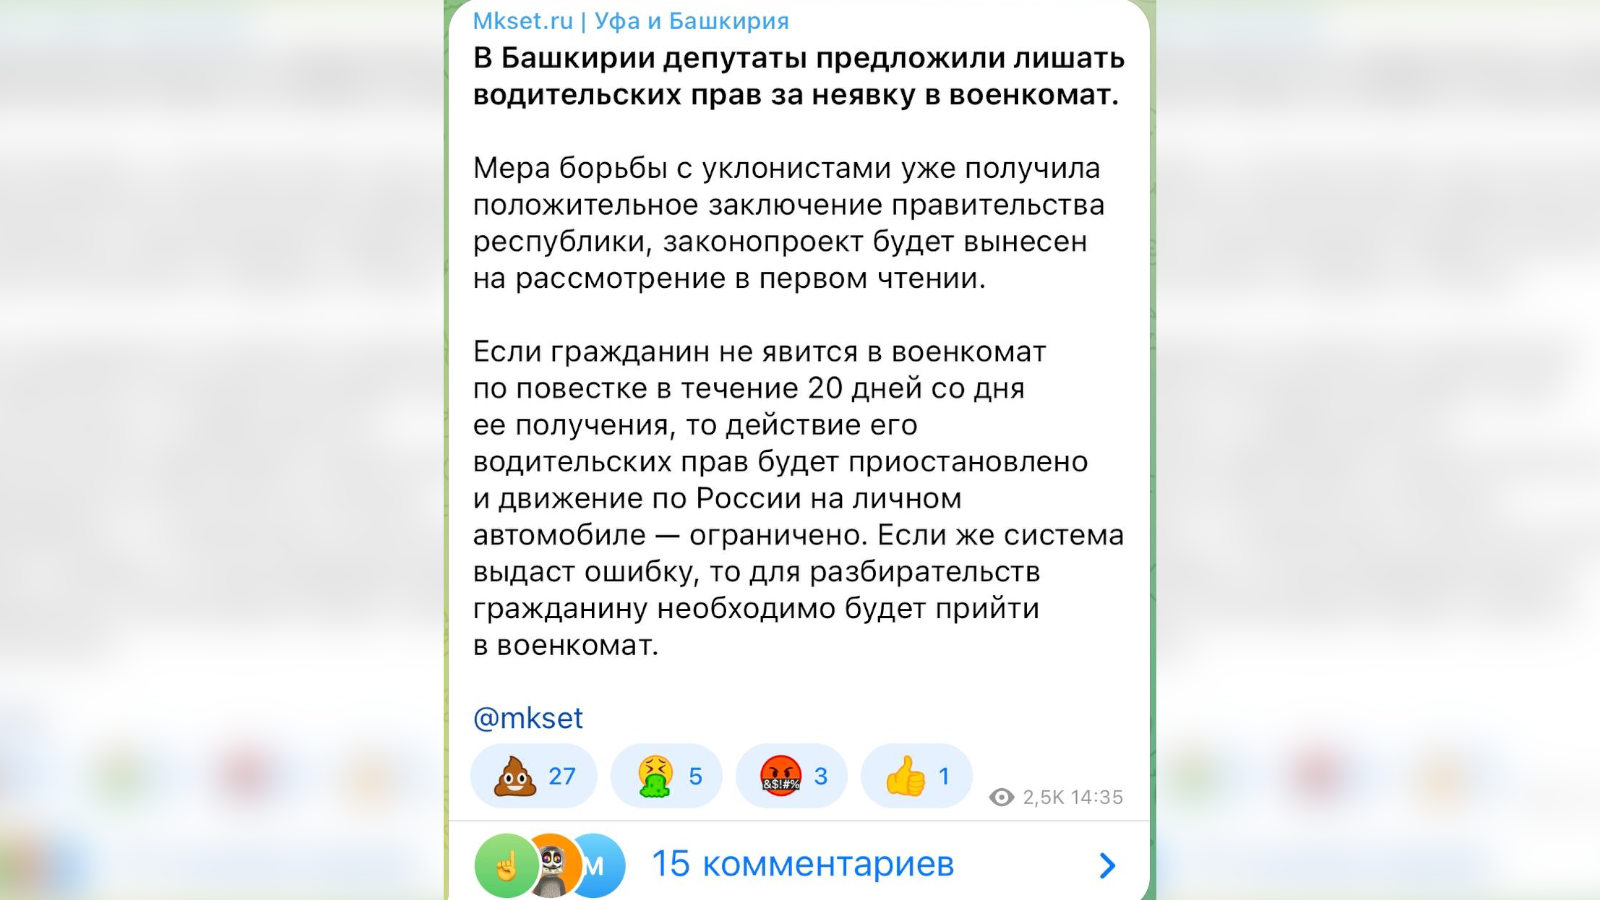 Loyal Bashkirs-deputies offered to deprive people of a driver’s license for not coming to the military registration and enlistment office. At first, of driver’s license, then of parental rights, then of any rights